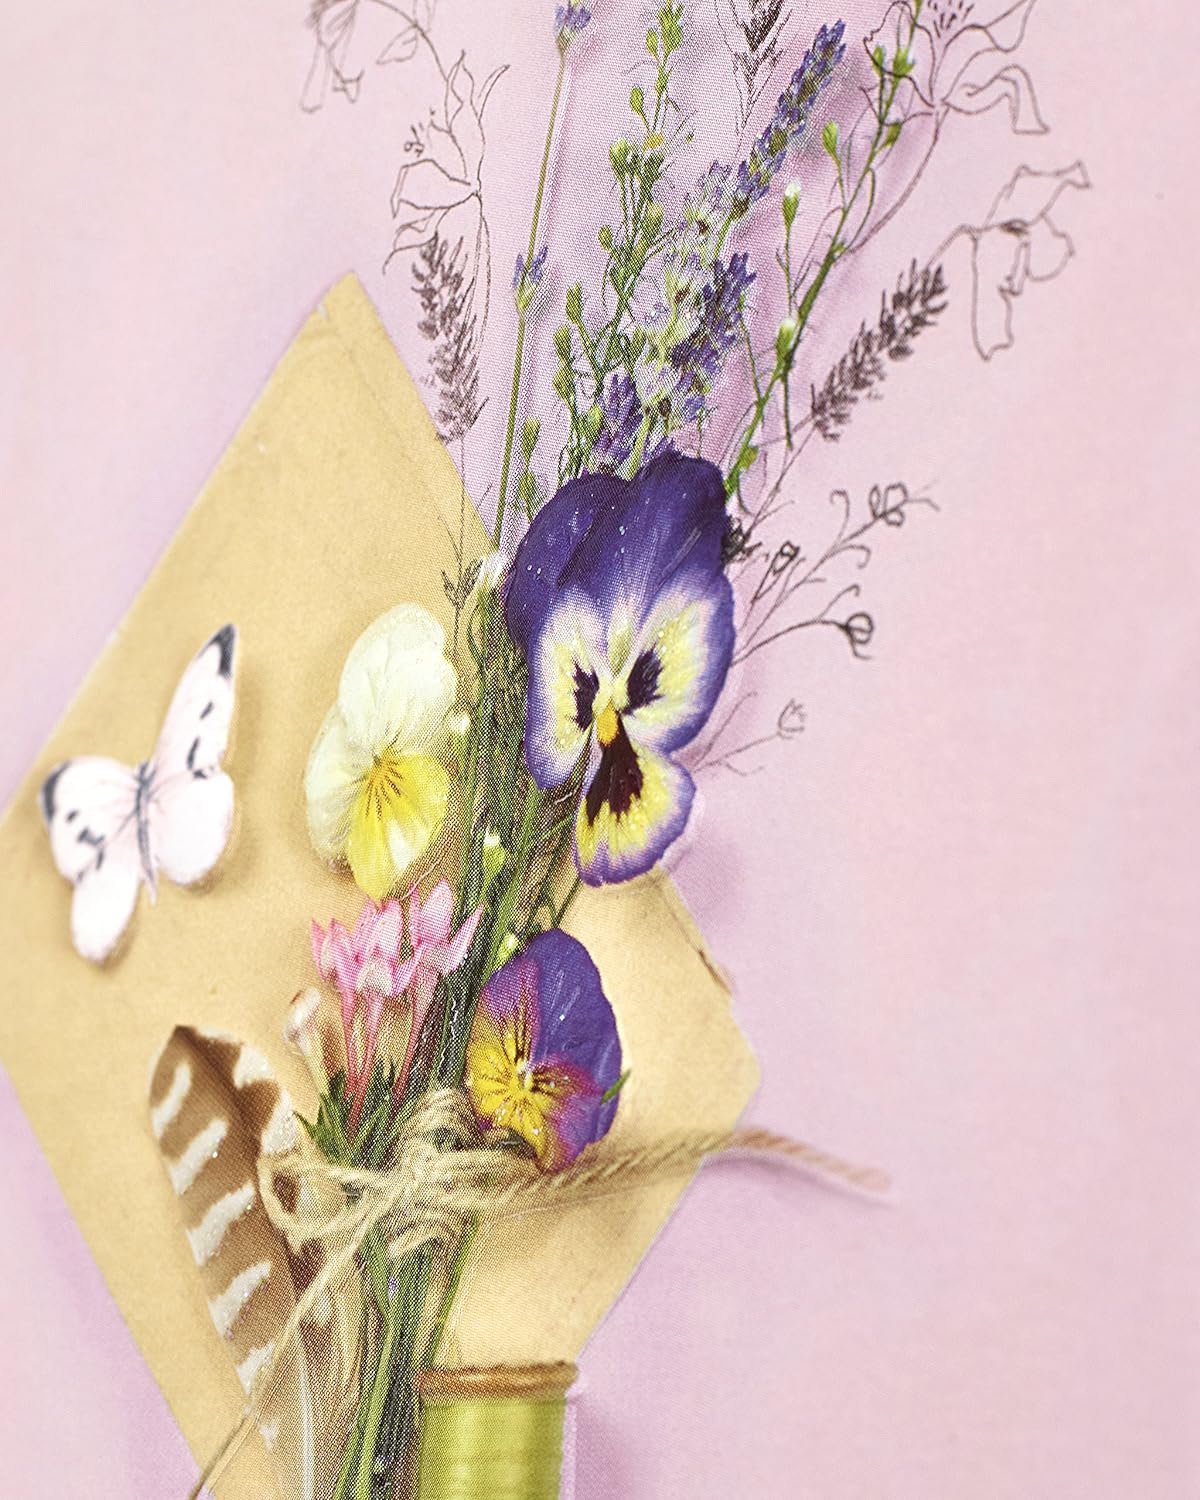 Pansy And Lavender Design Enjoy Every Minute Birthday Greeting Card